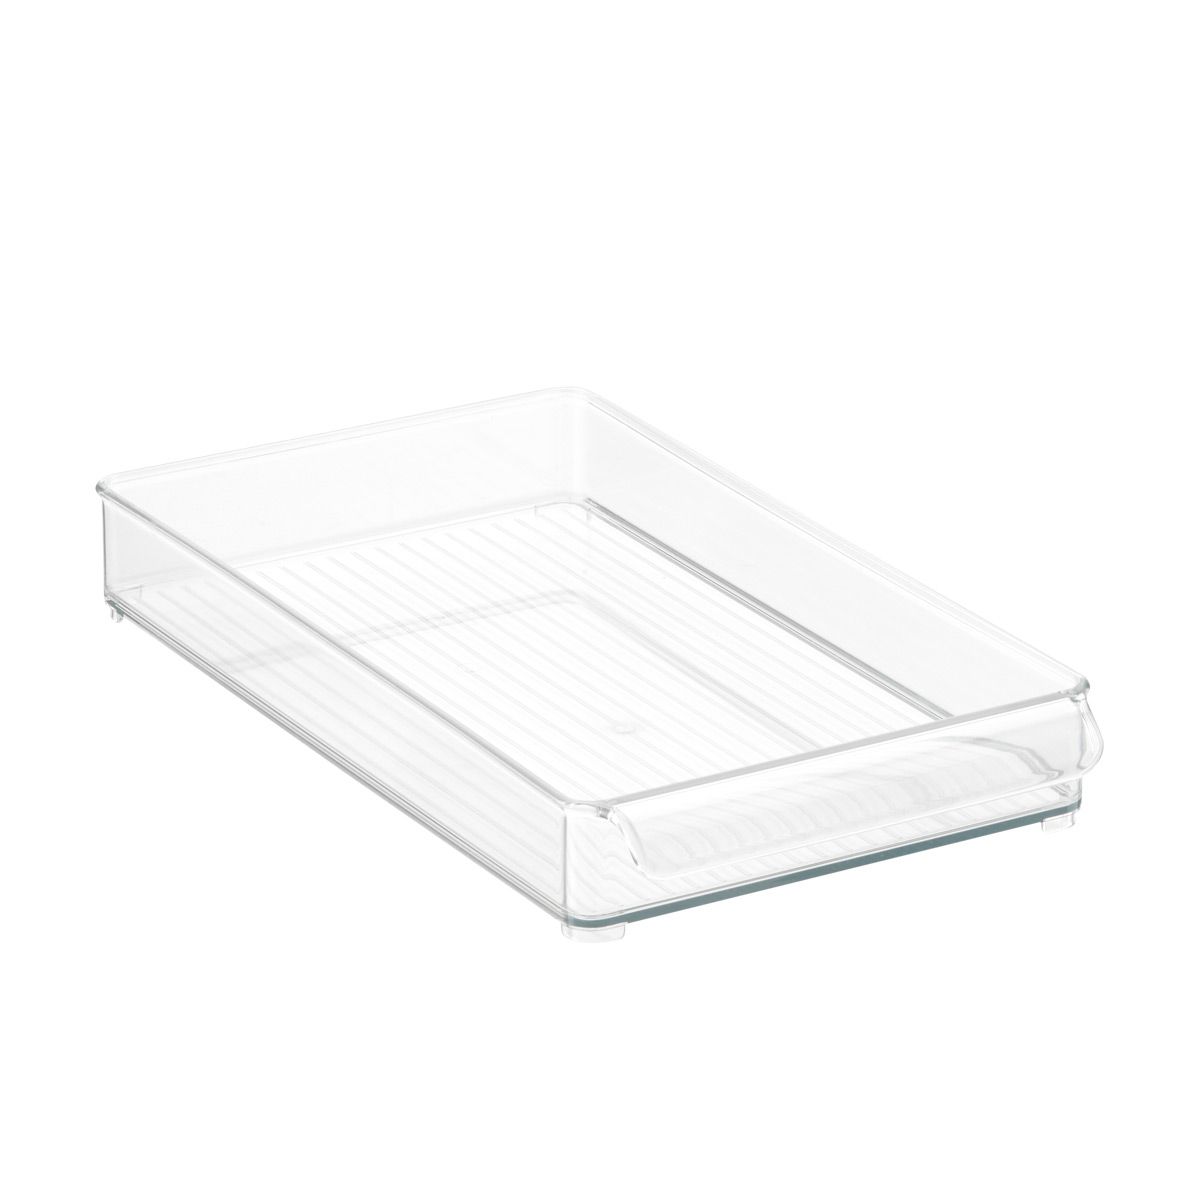 iDESIGN Wide Fridge Bins Tray Clear | The Container Store